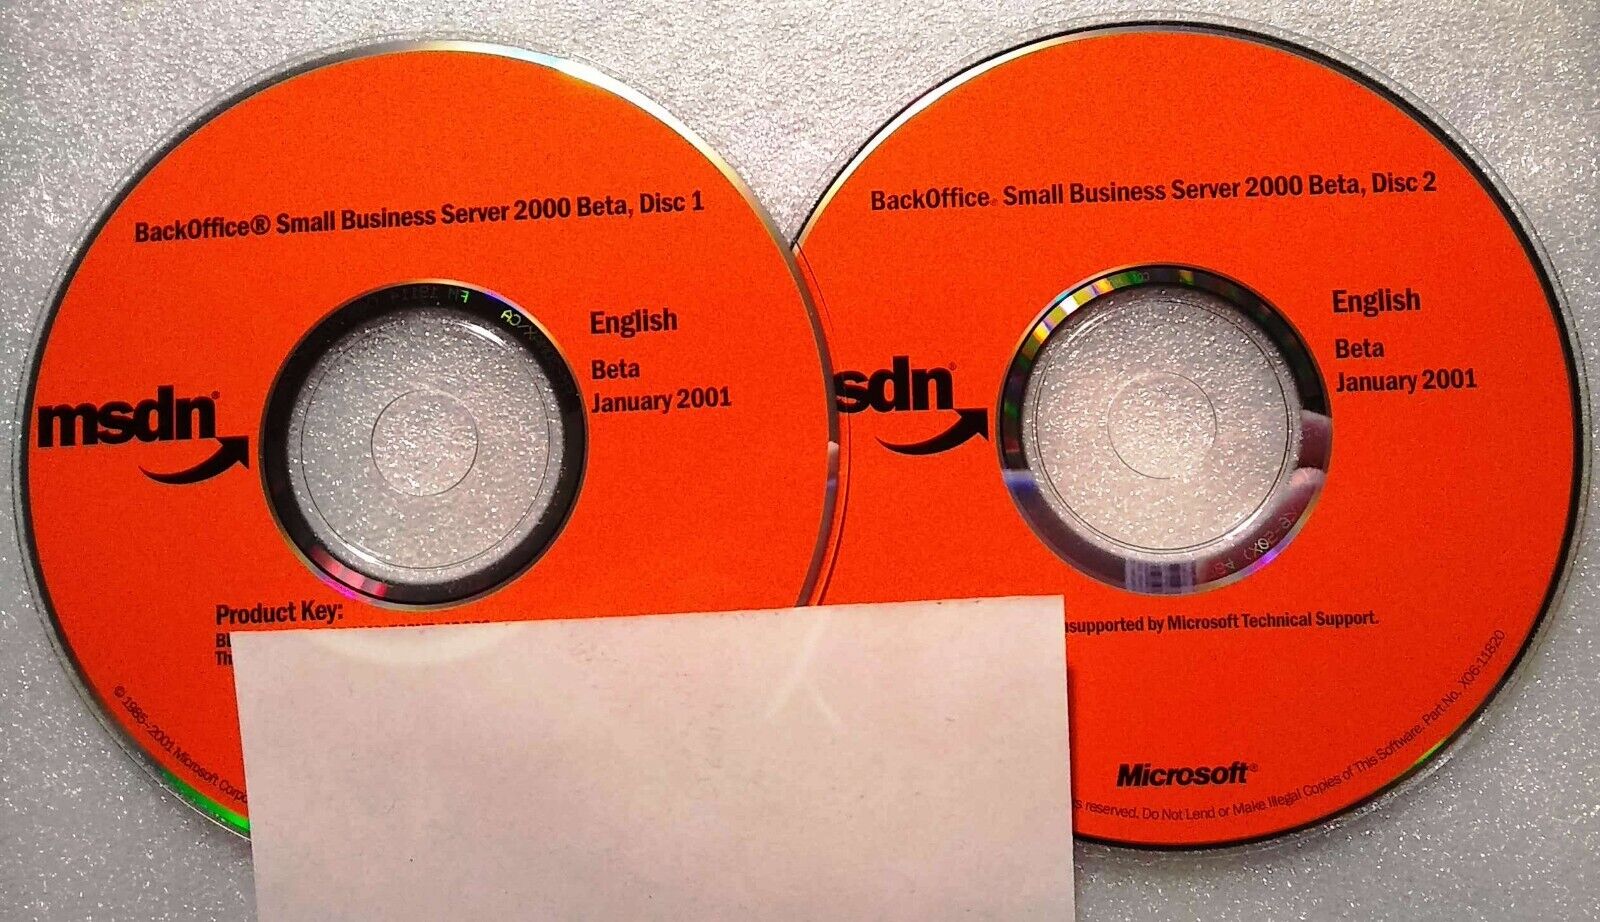 Microsoft BackOffice Small Business Server 2000 w/ Product Key & License